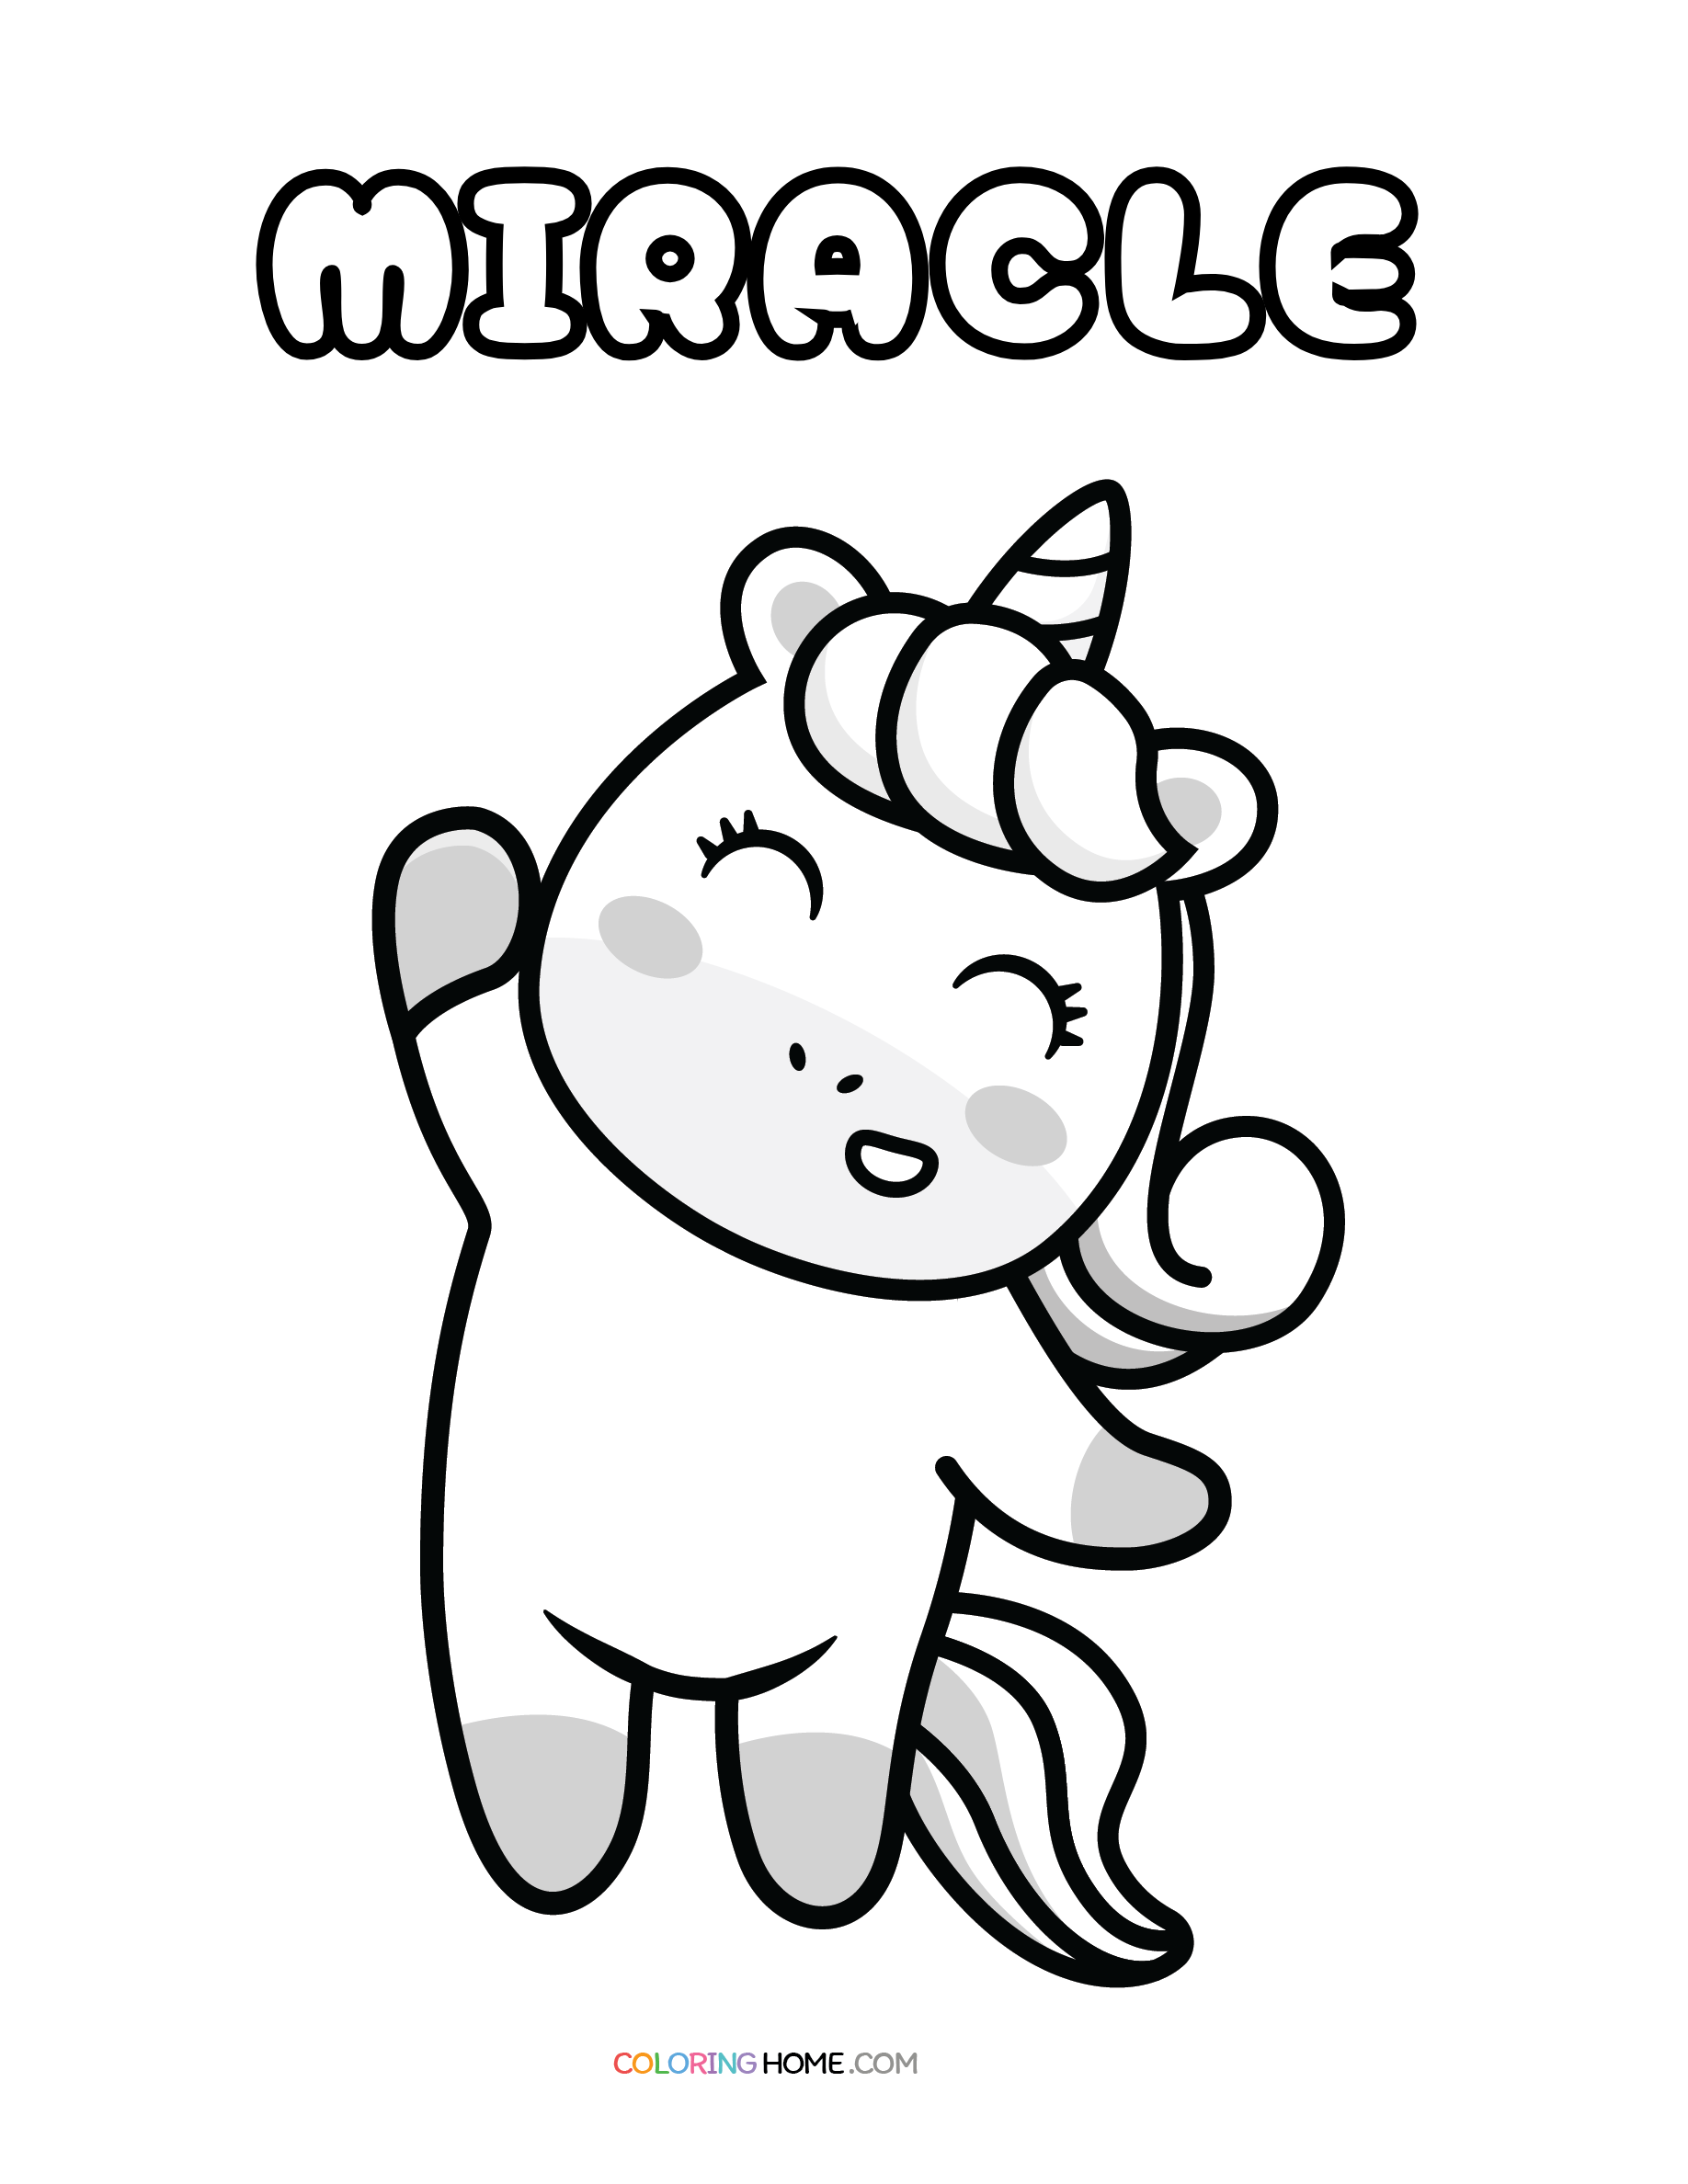 Miracle unicorn coloring page